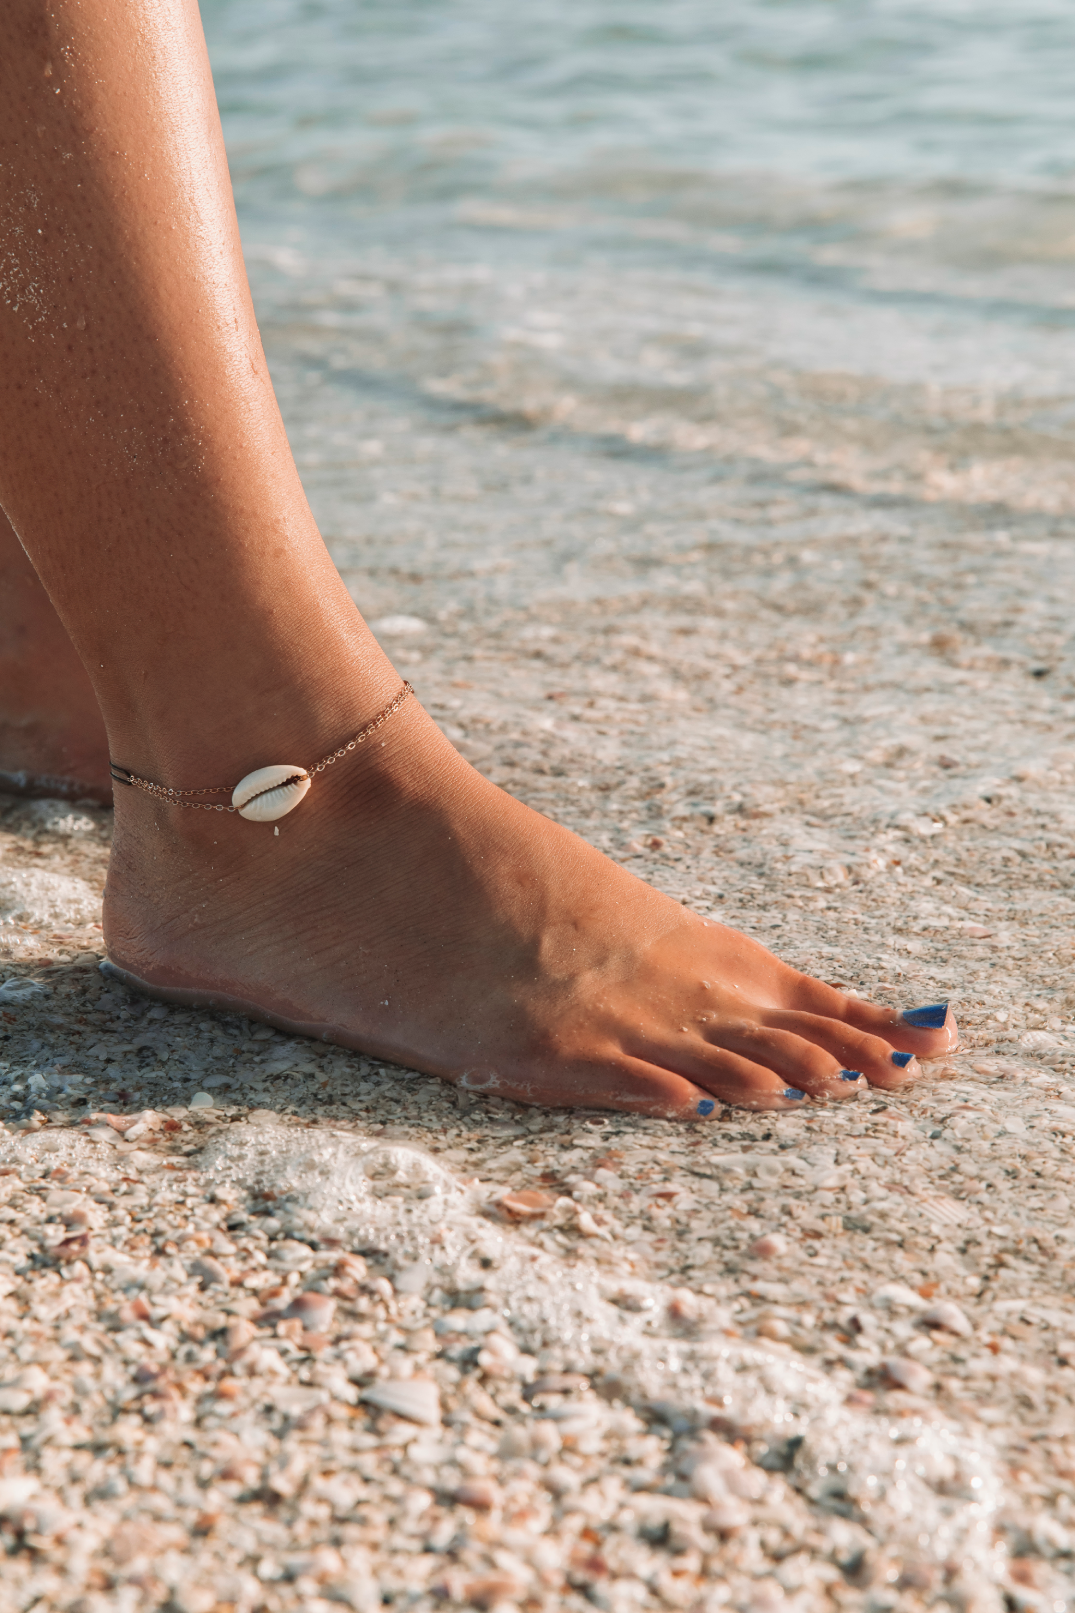 Mini Natural Shell 14k Rose Gold Chain Anklet on Colored Cord